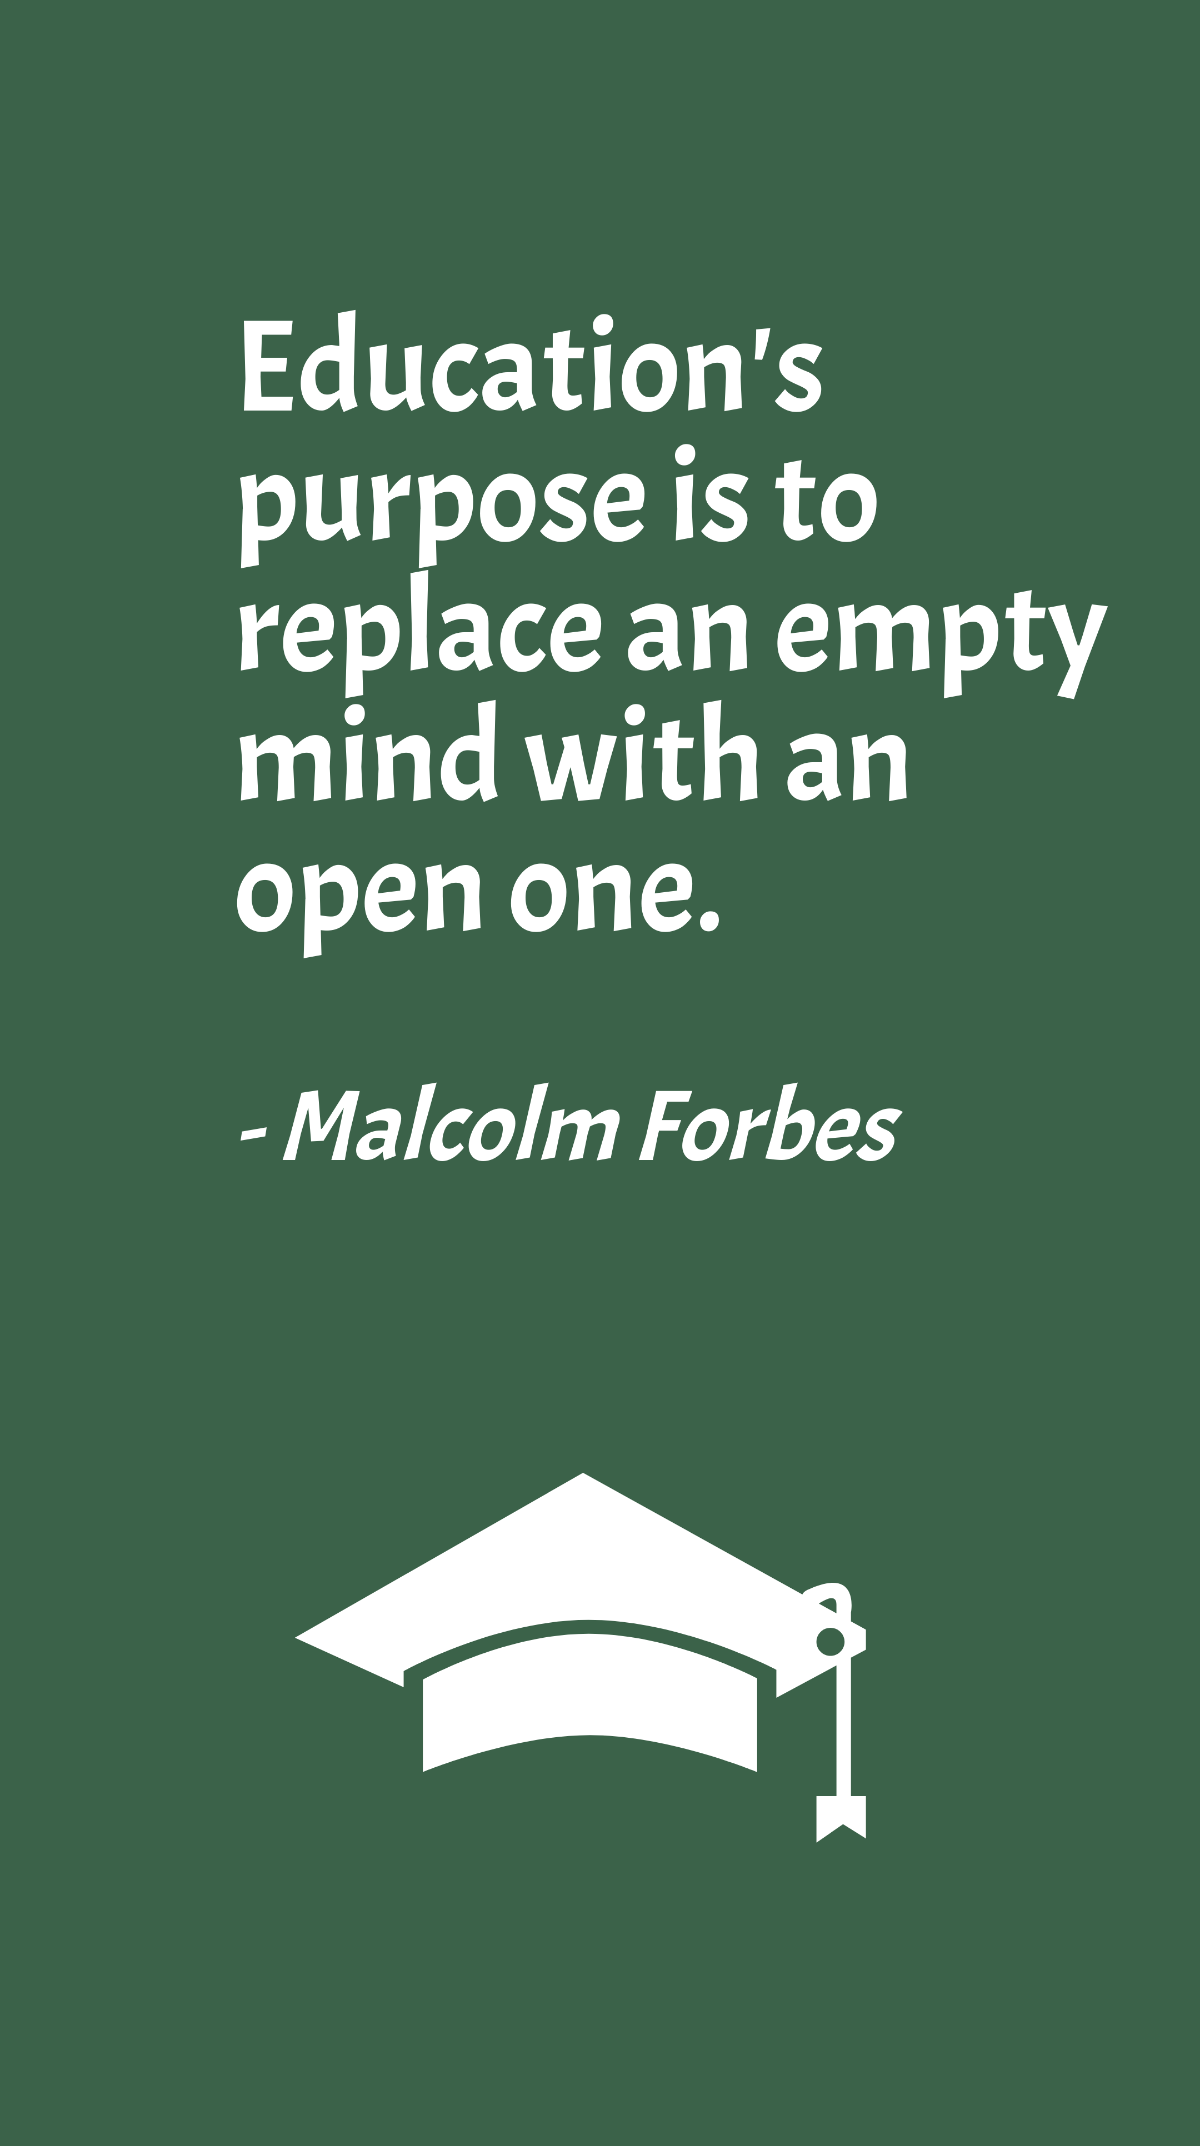 Free Malcolm Forbes - Education's purpose is to replace an empty mind with an open one. Template